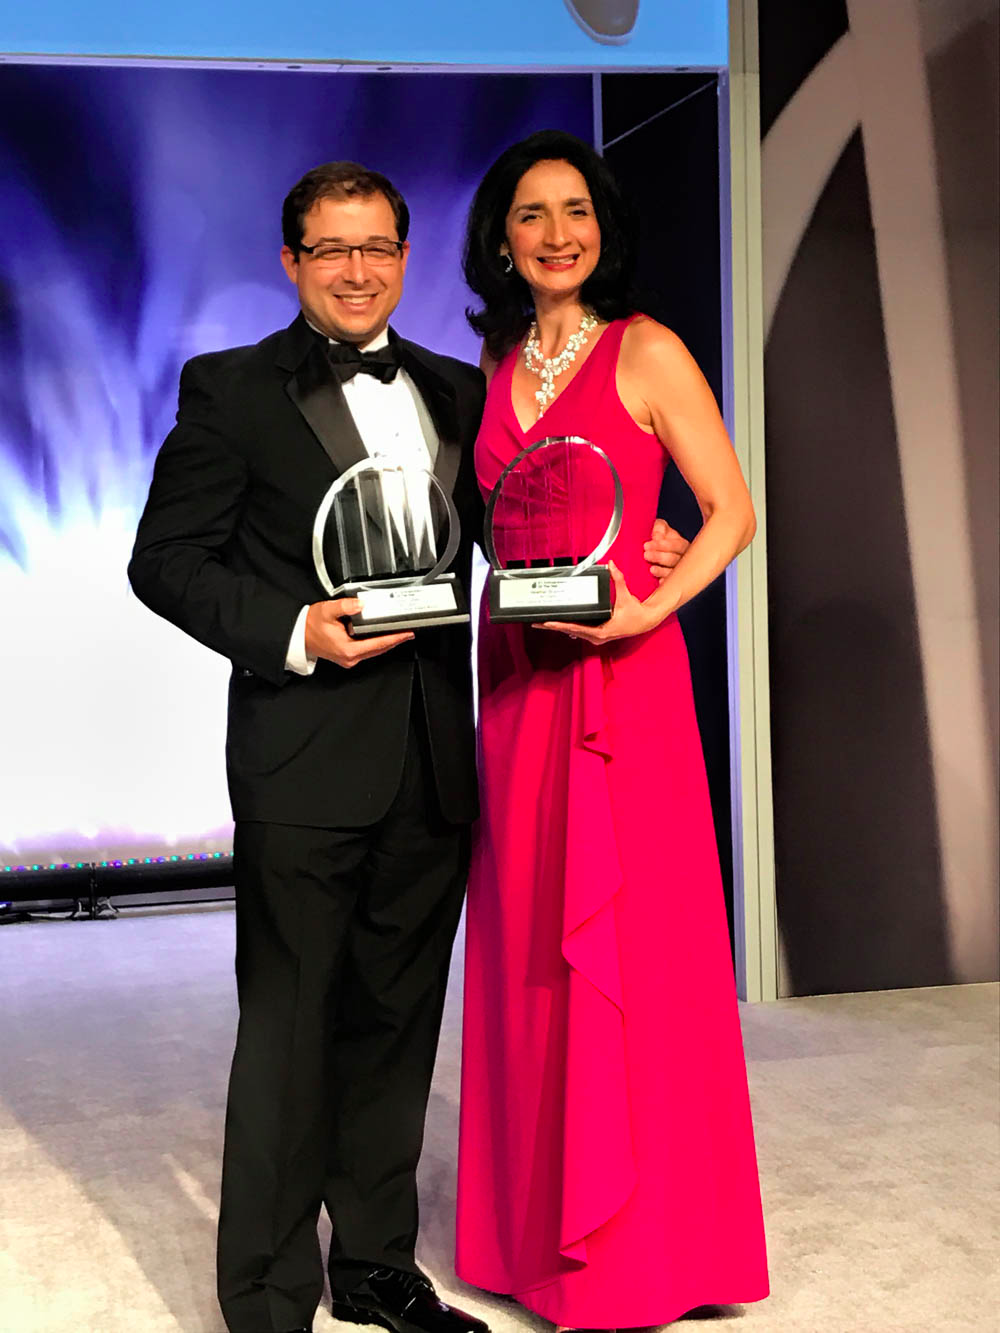 Jason Cohen and Heather Brunner winning the E&Y Central Texas Entrepreneur of the Year Award 2017